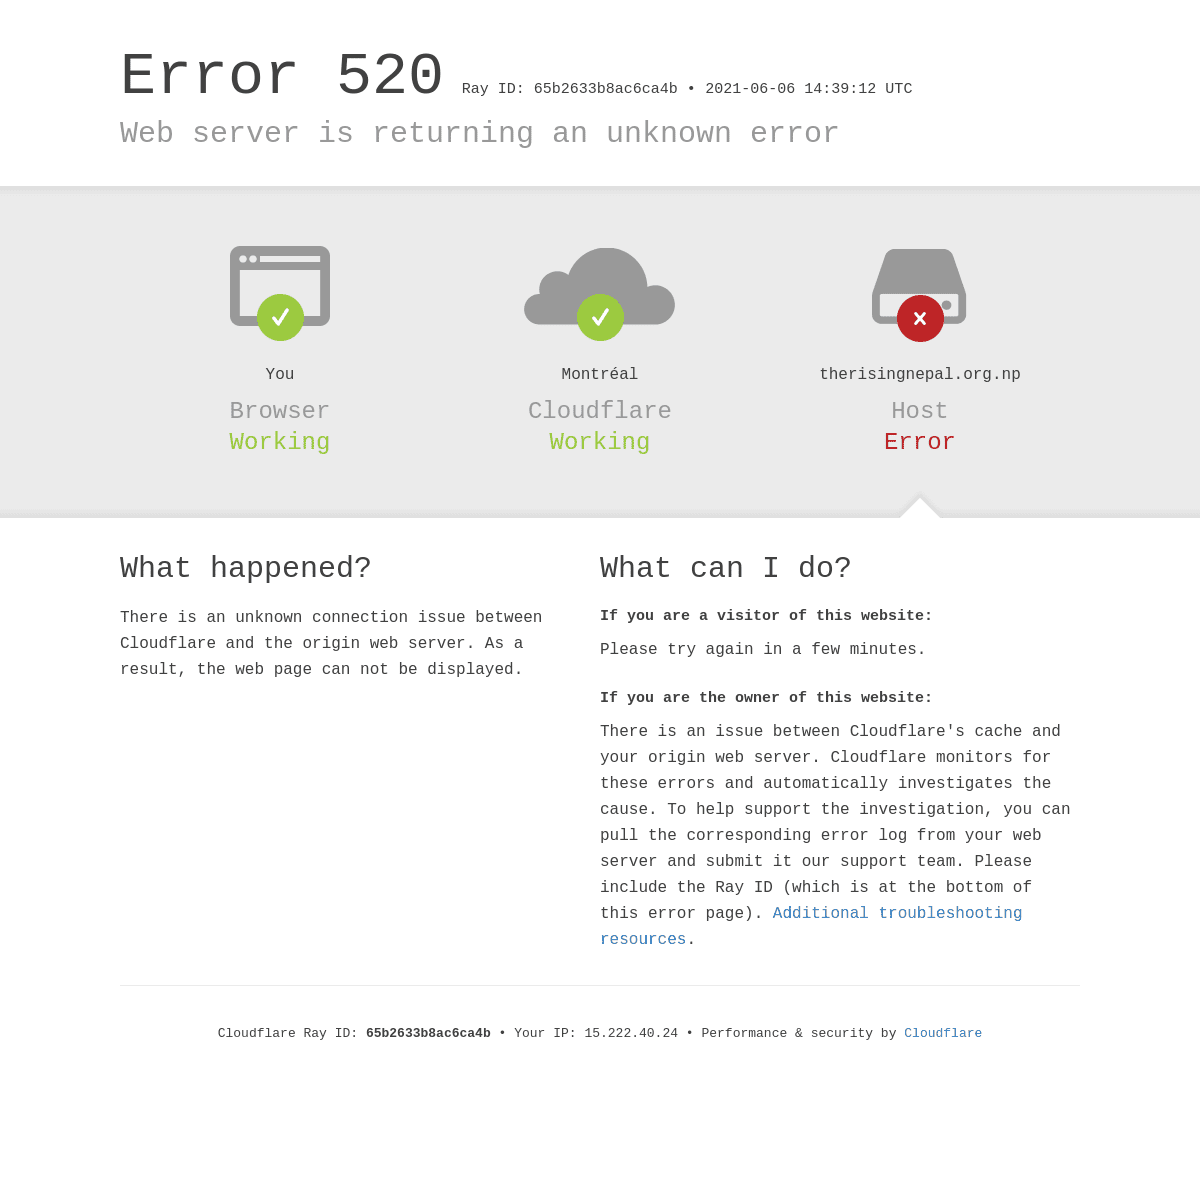 A complete backup of https://therisingnepal.org.np